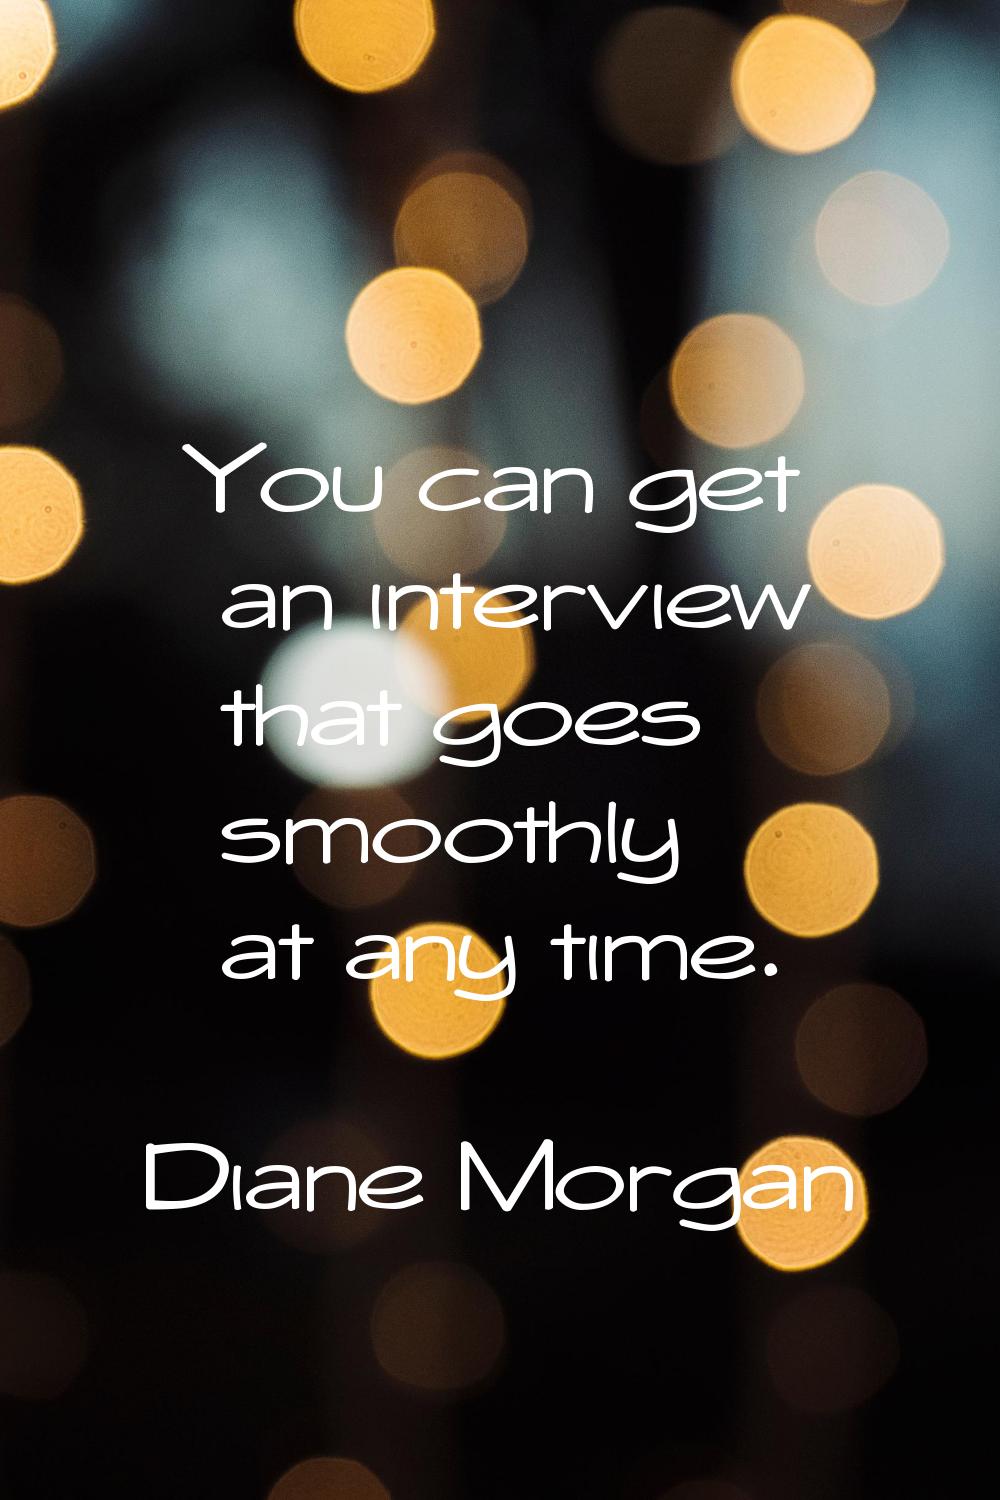 You can get an interview that goes smoothly at any time.